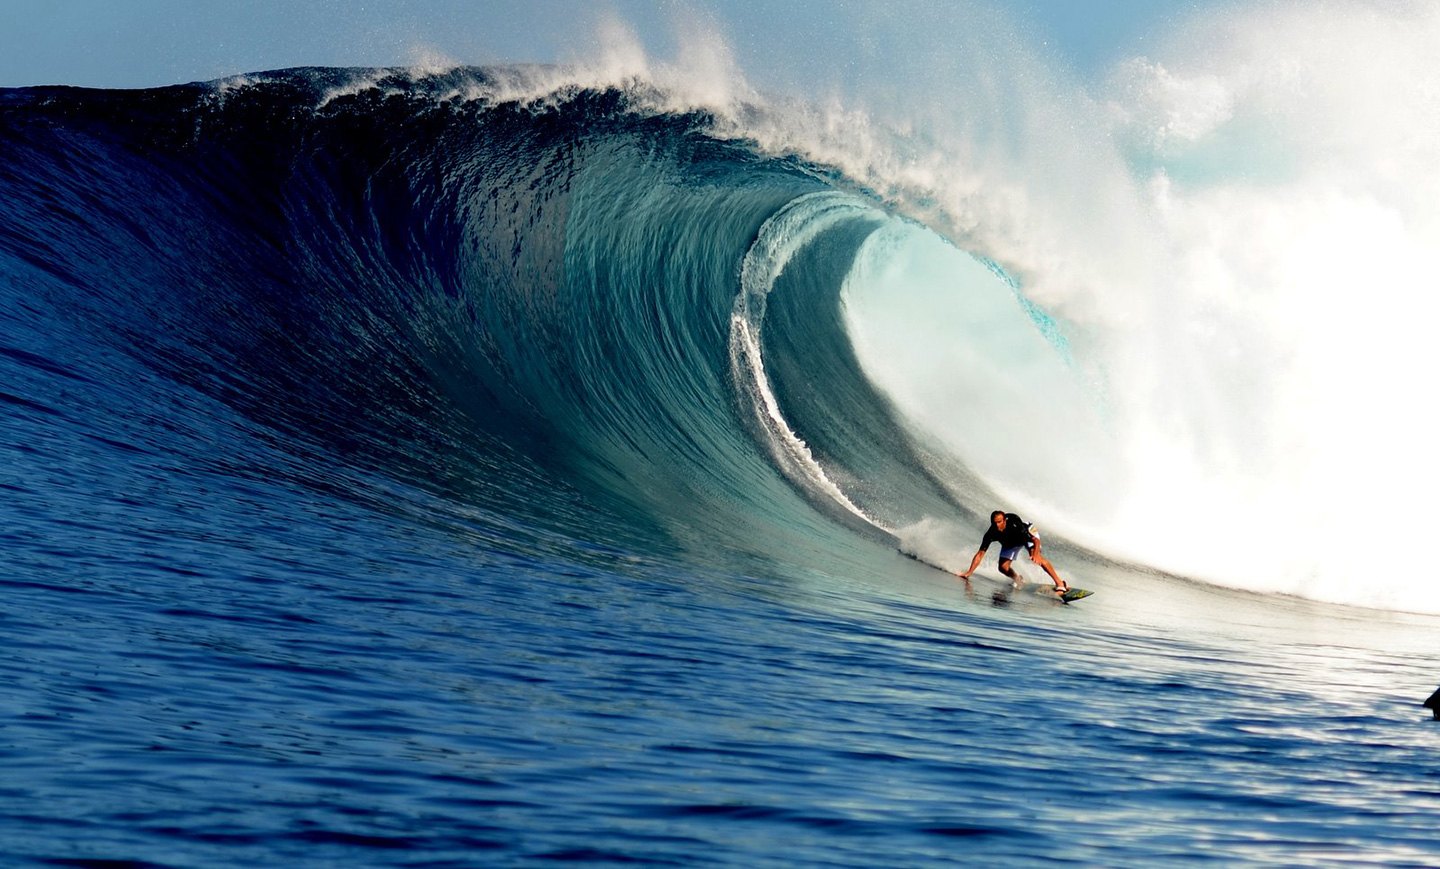 Laird Hamilton on the Meaning of Life